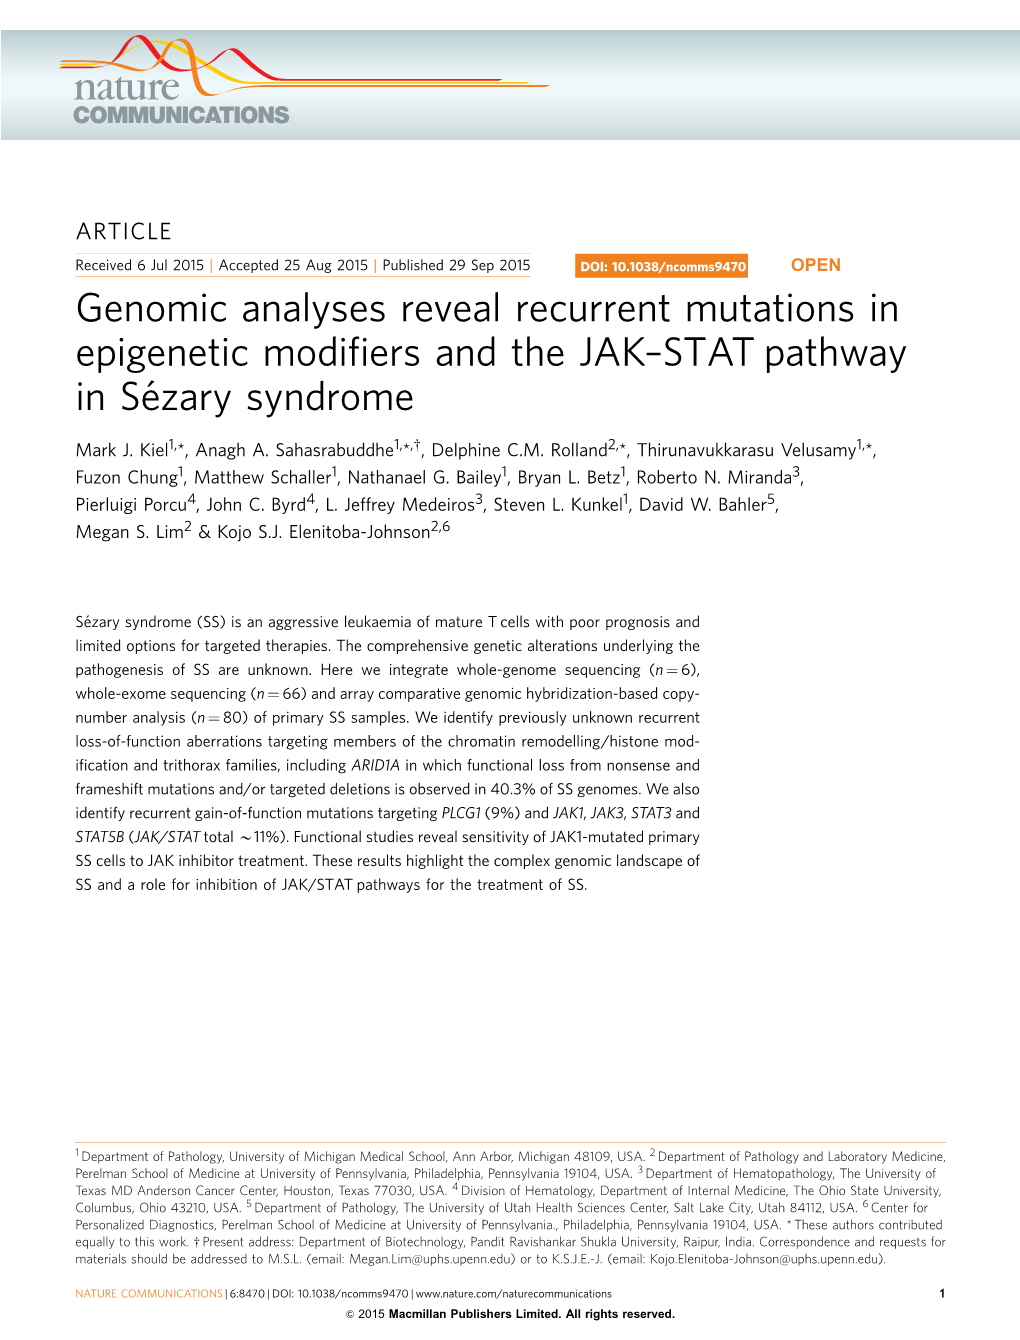 Genomic Analyses Reveal Recurrent Mutations in Epigenetic Modifiers